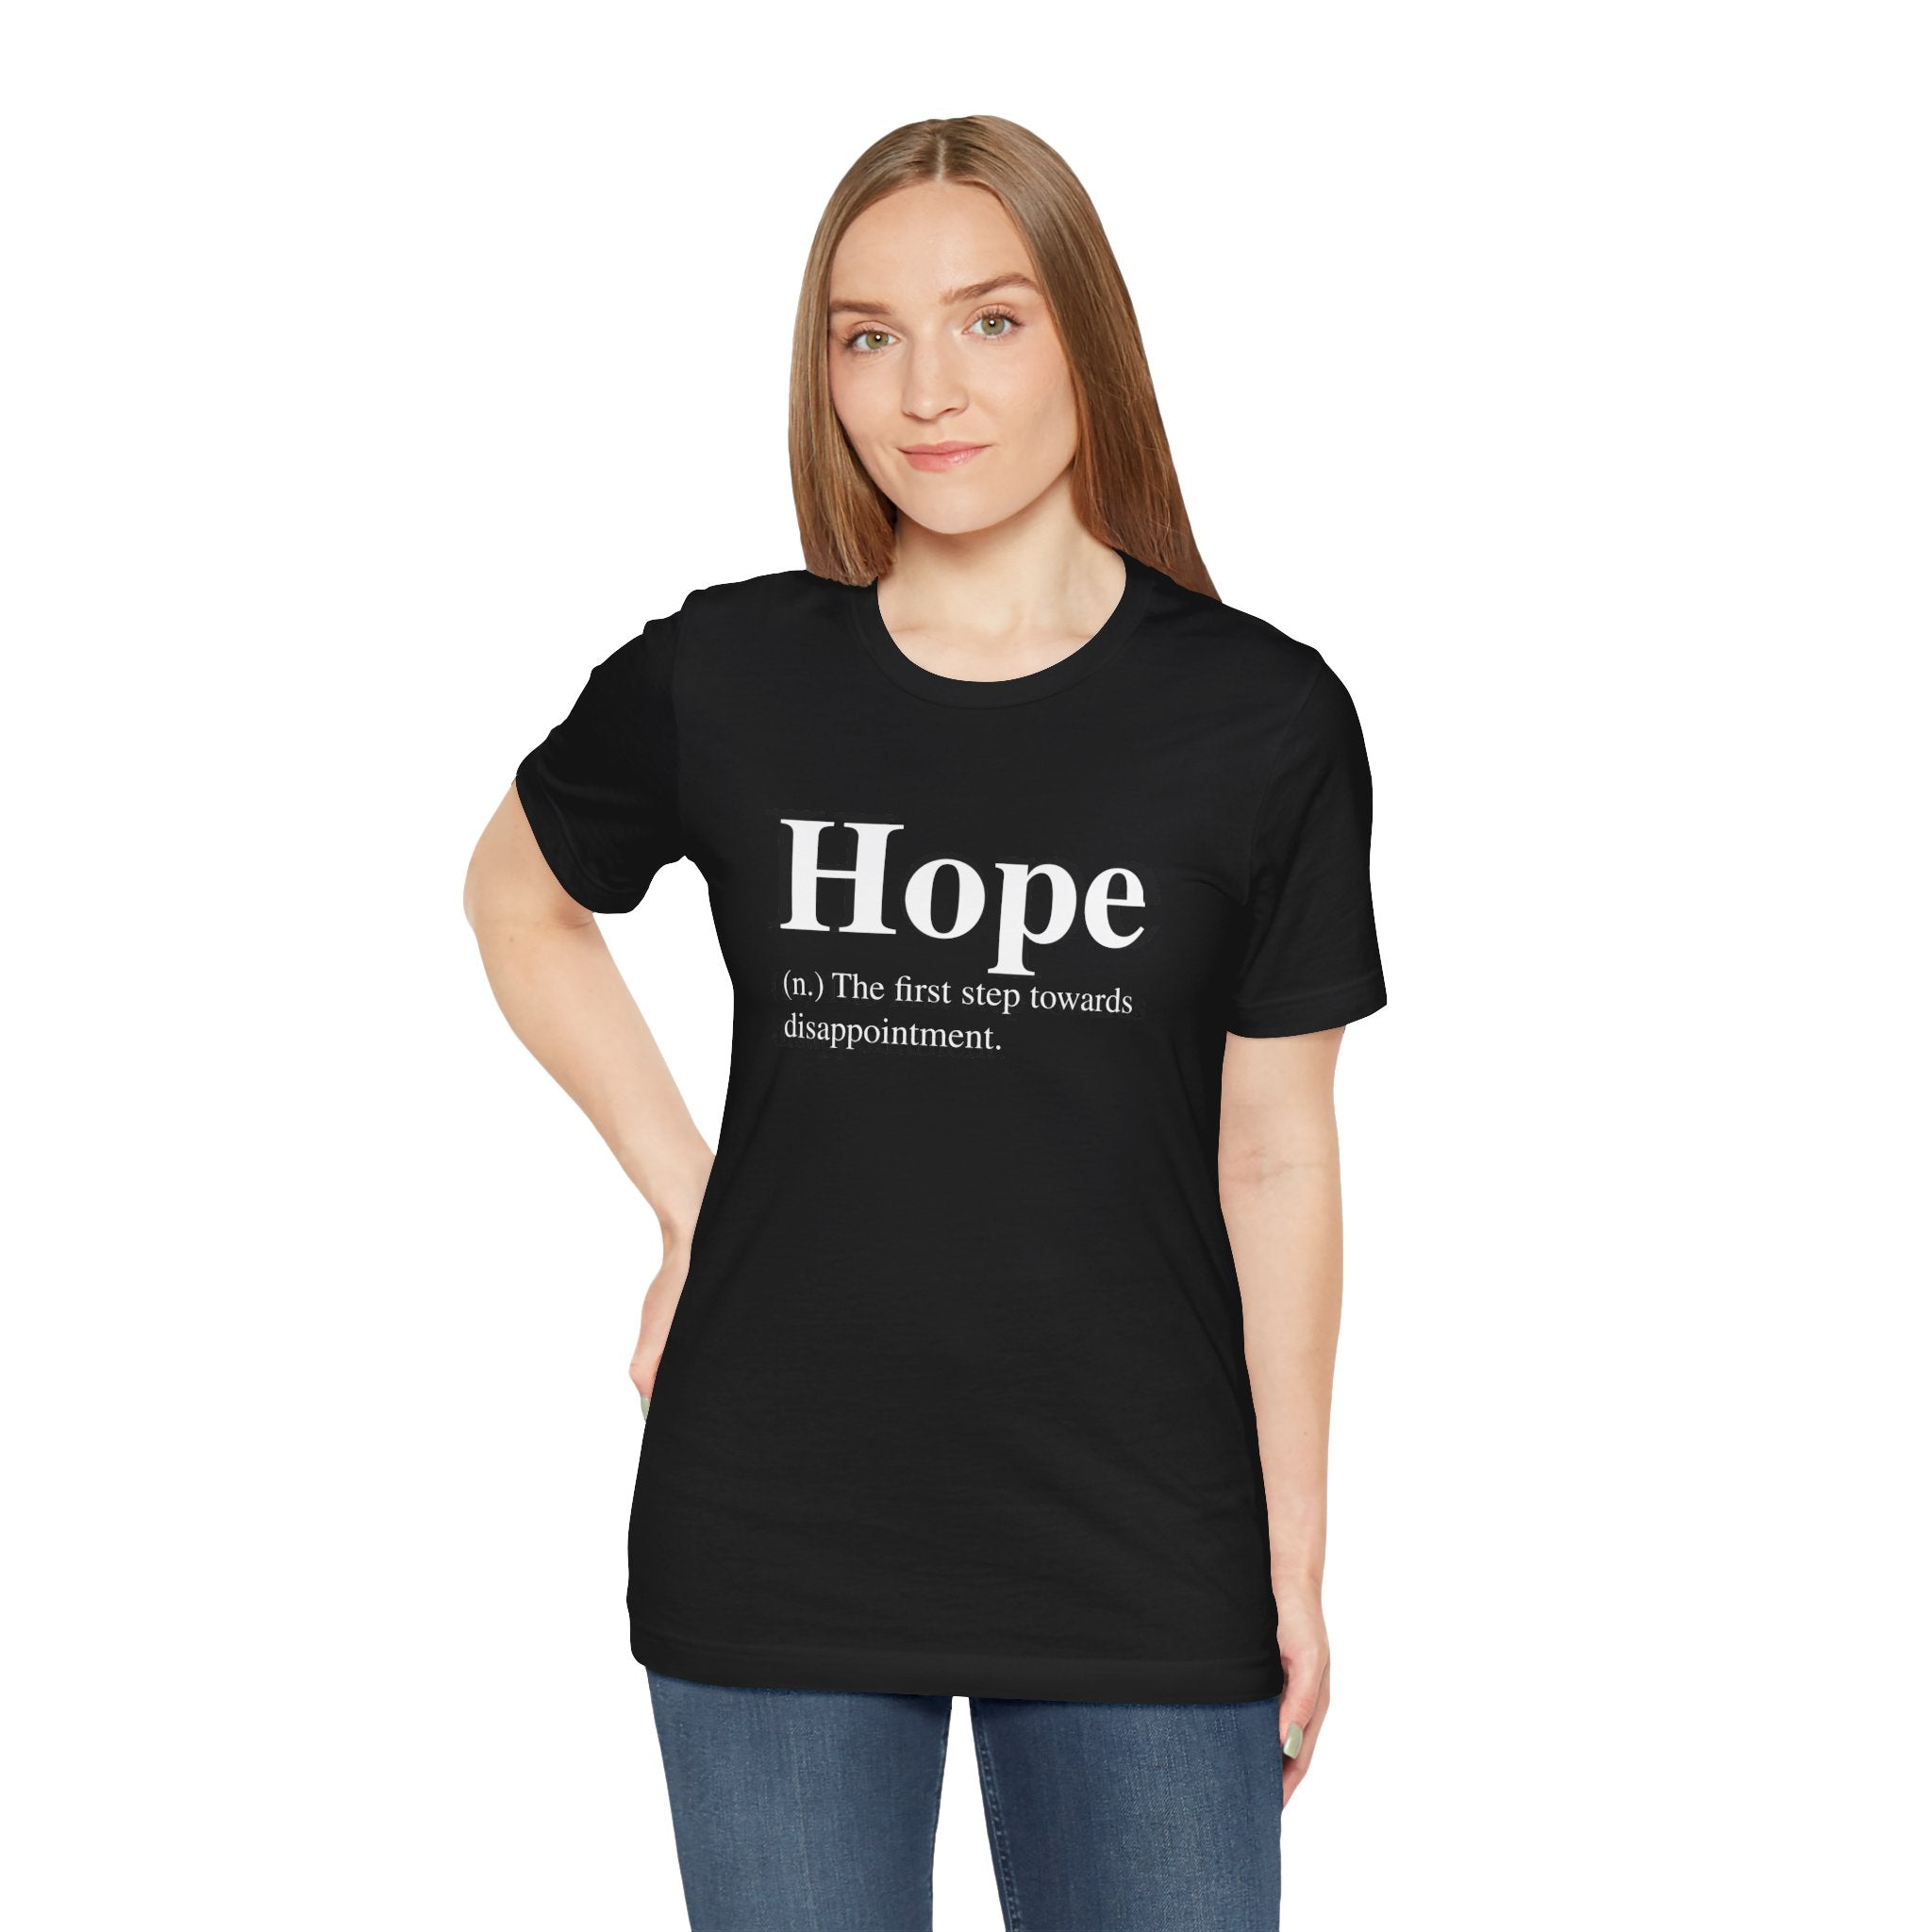 A young woman in a soft cotton, unisex Hope T-shirt with the word "hope" followed by a cynical definition printed on it.